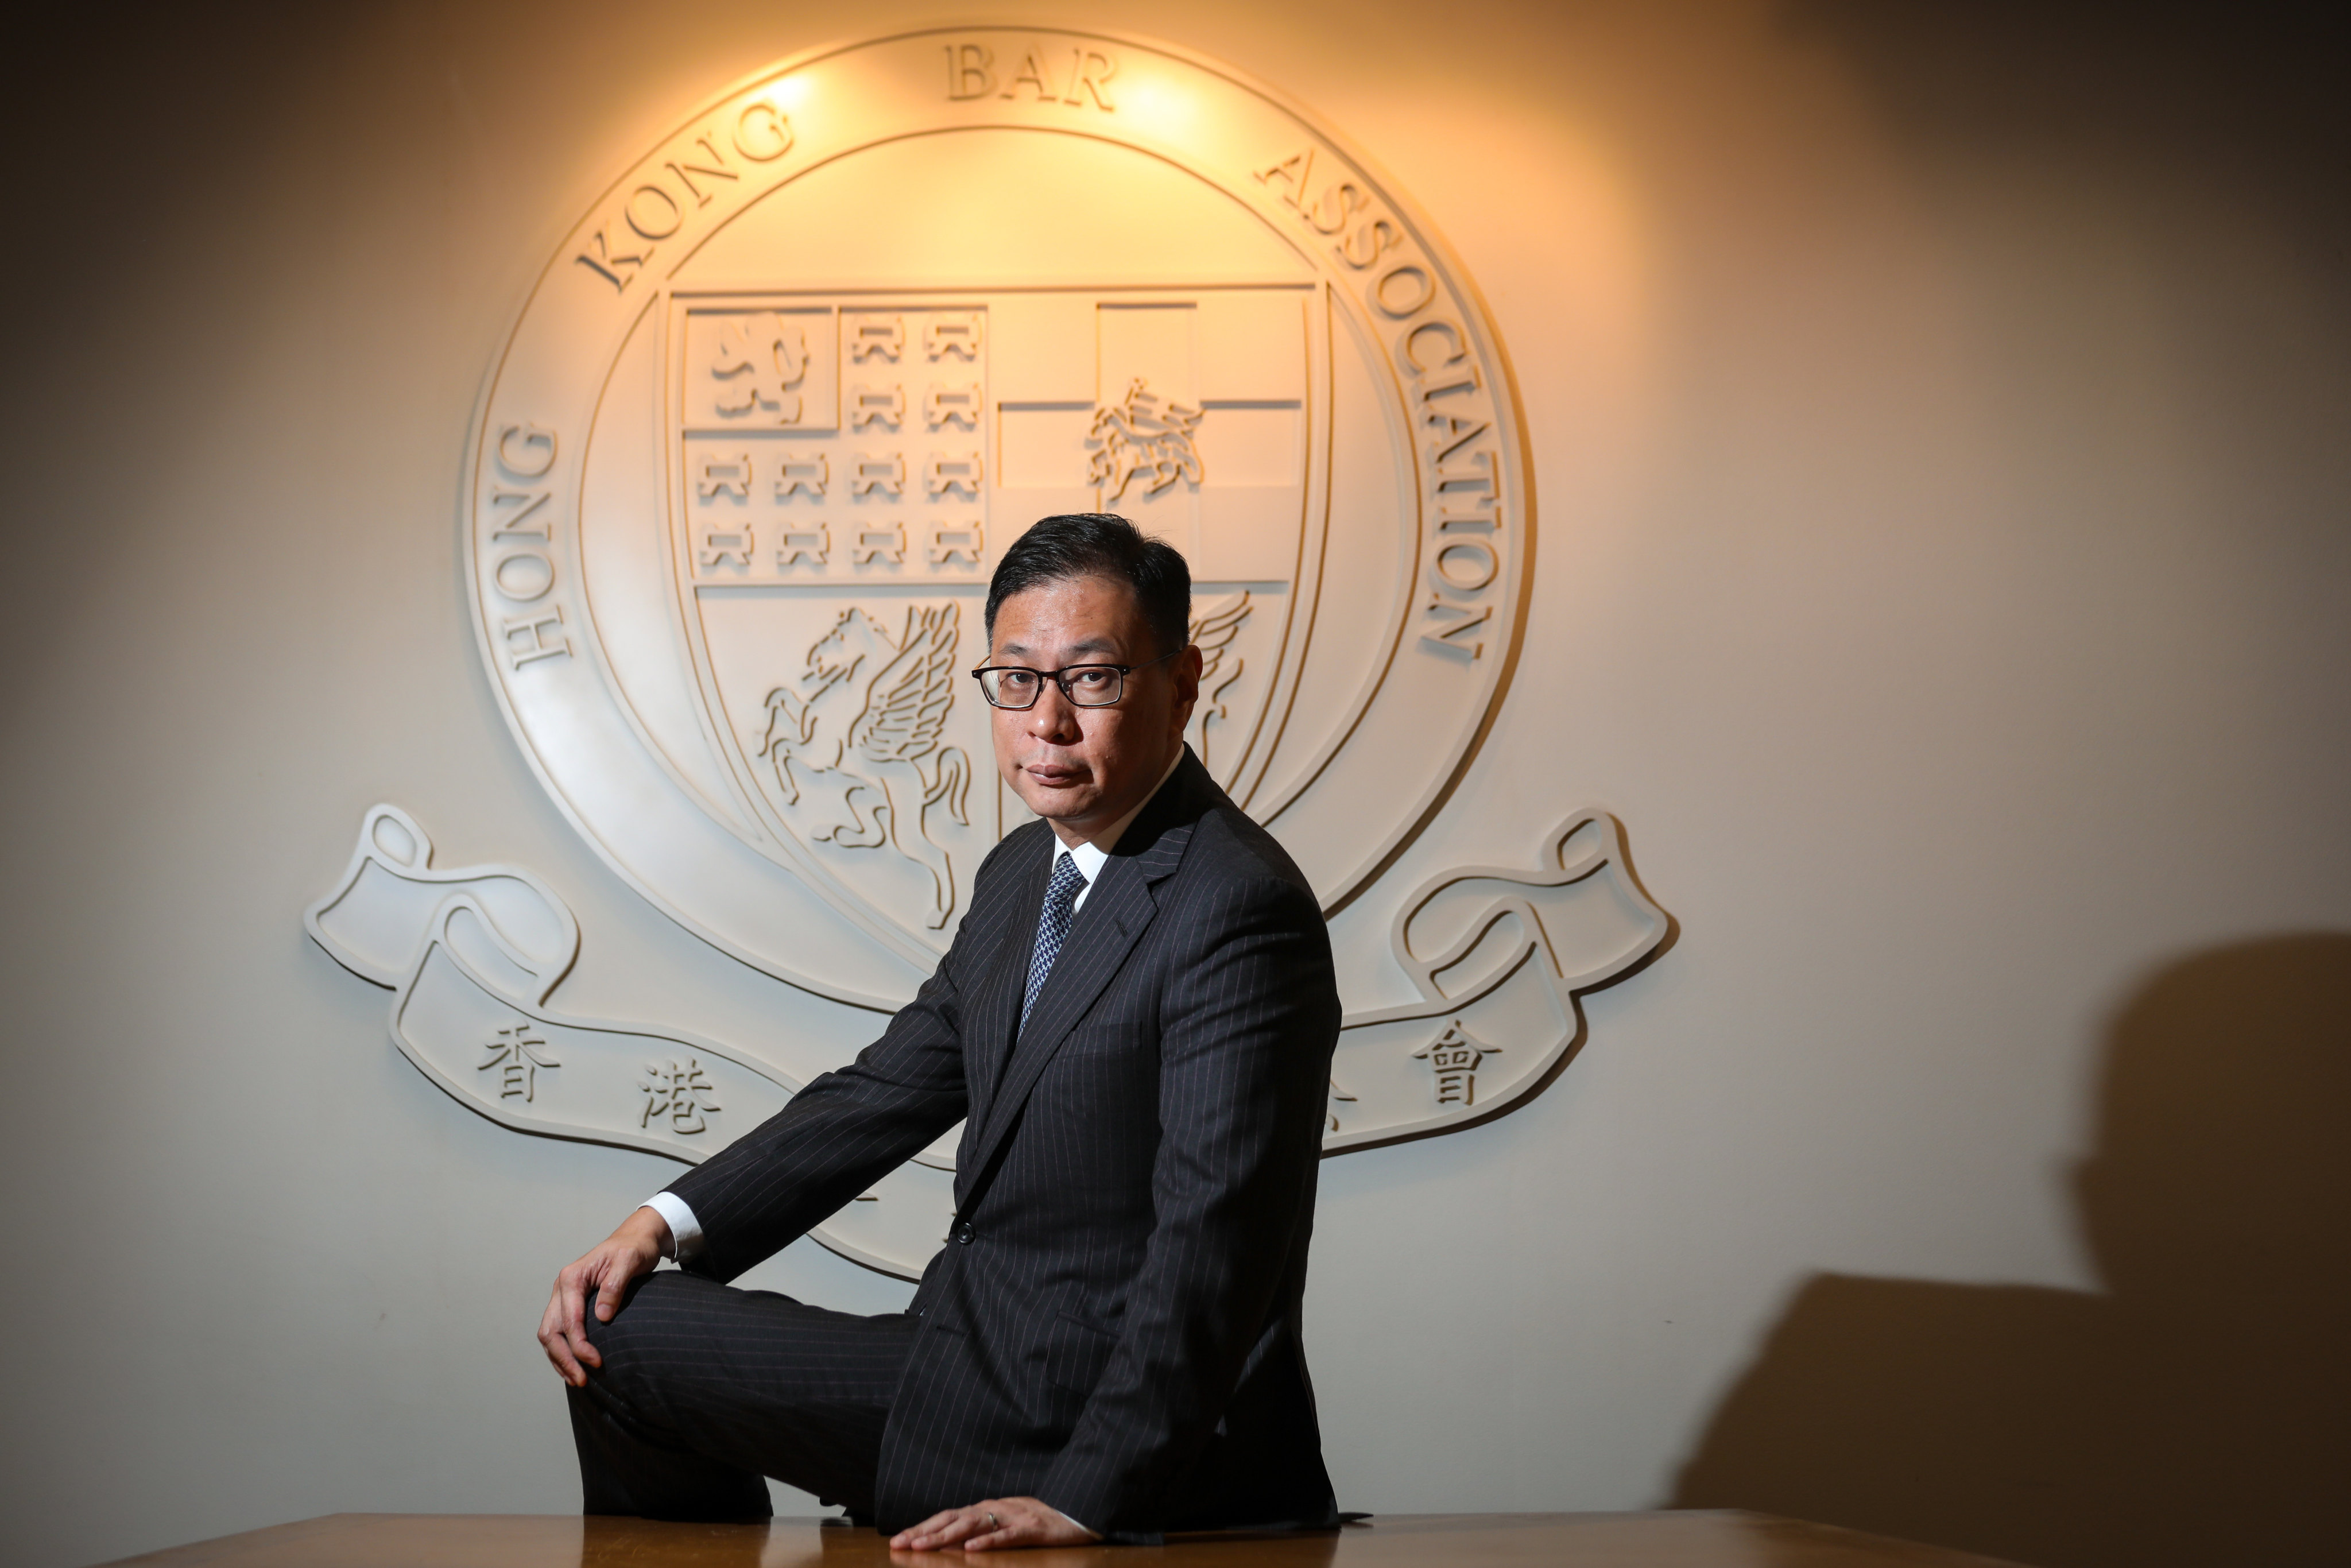 Bar Association chairman Victor Dawes says independence of the profession remains vital. Photo: Xiaomei Chen